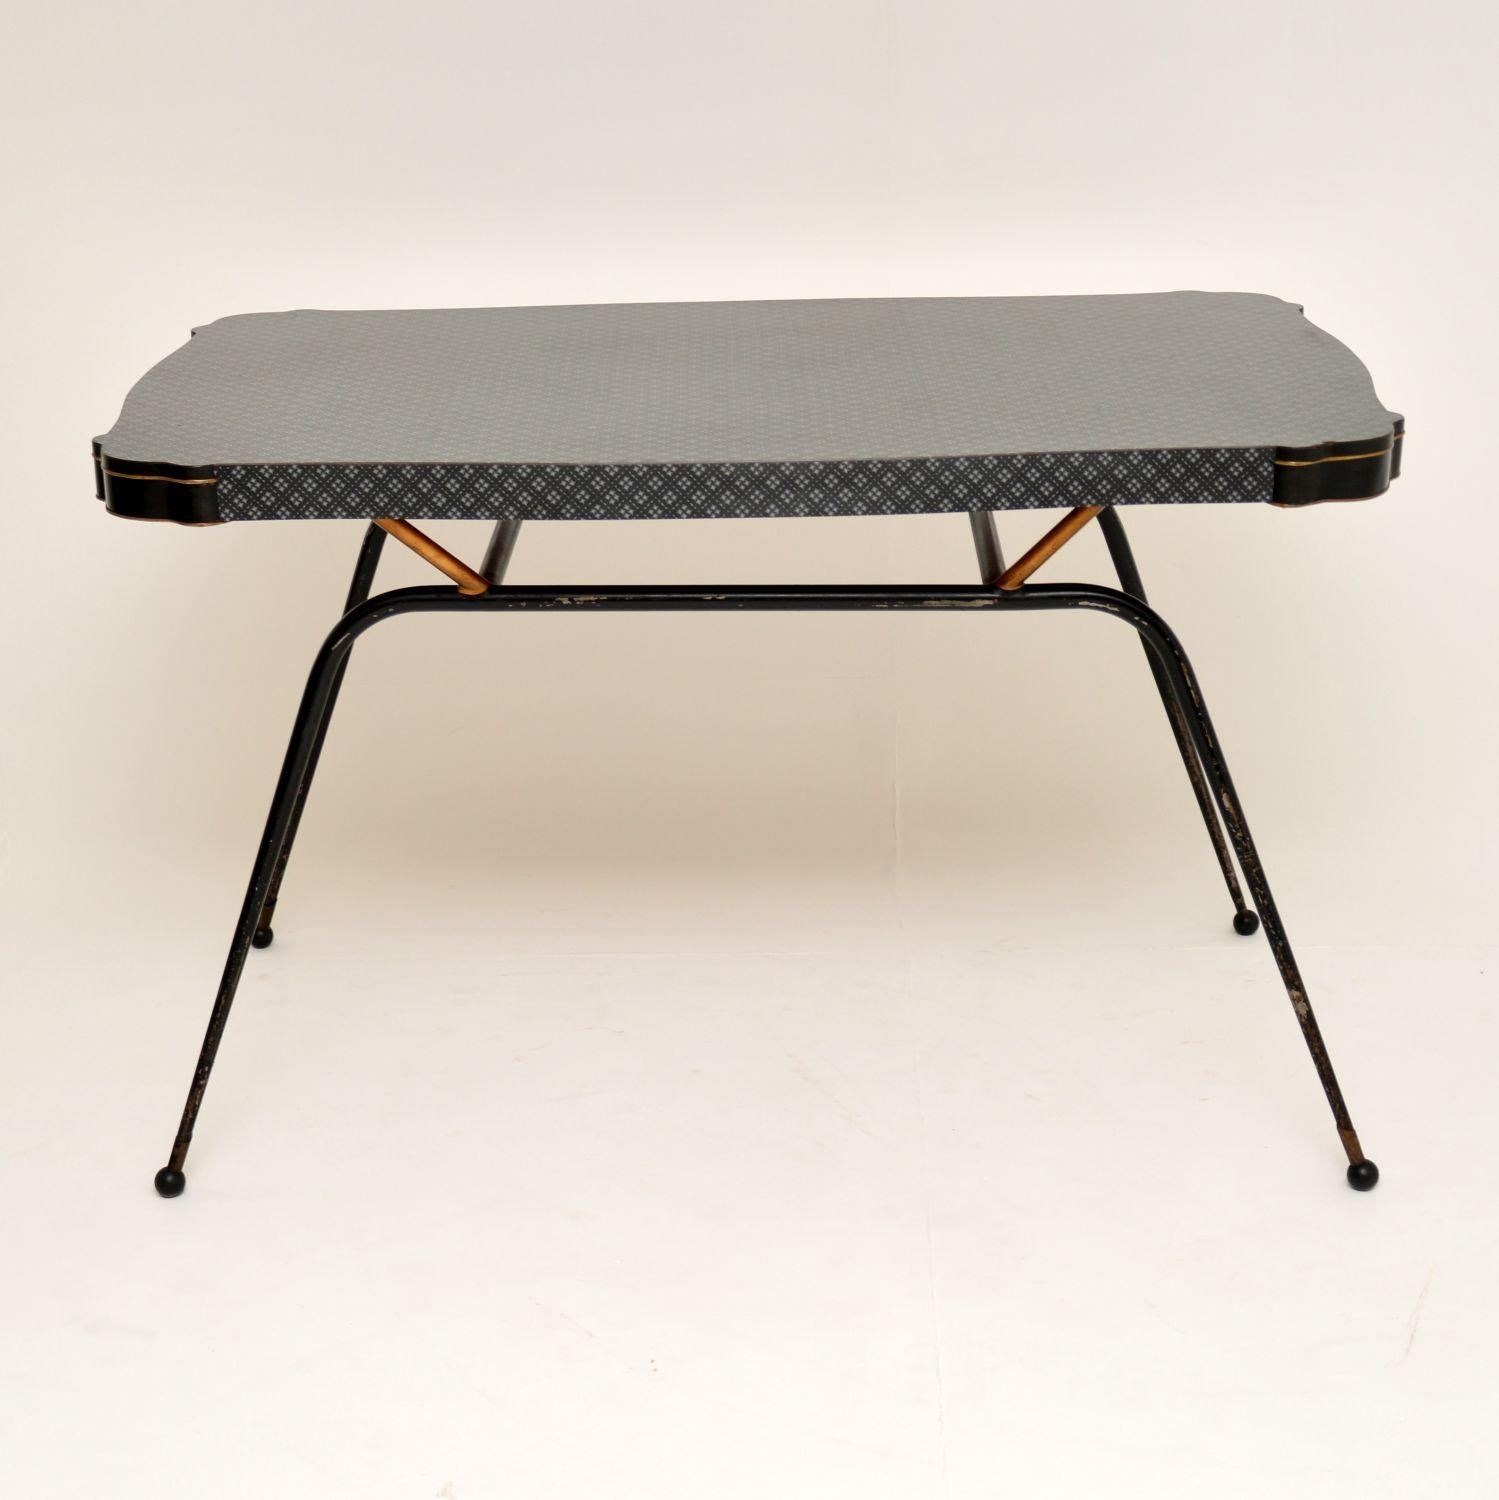 A super stylish and very rare vintage dining table. It was made in Italy, and it dates from the 1950’s.

It has a beautiful shape, patterned Formica top, and amazing ebonised steel base. The legs have brass accents and terminate in lovely